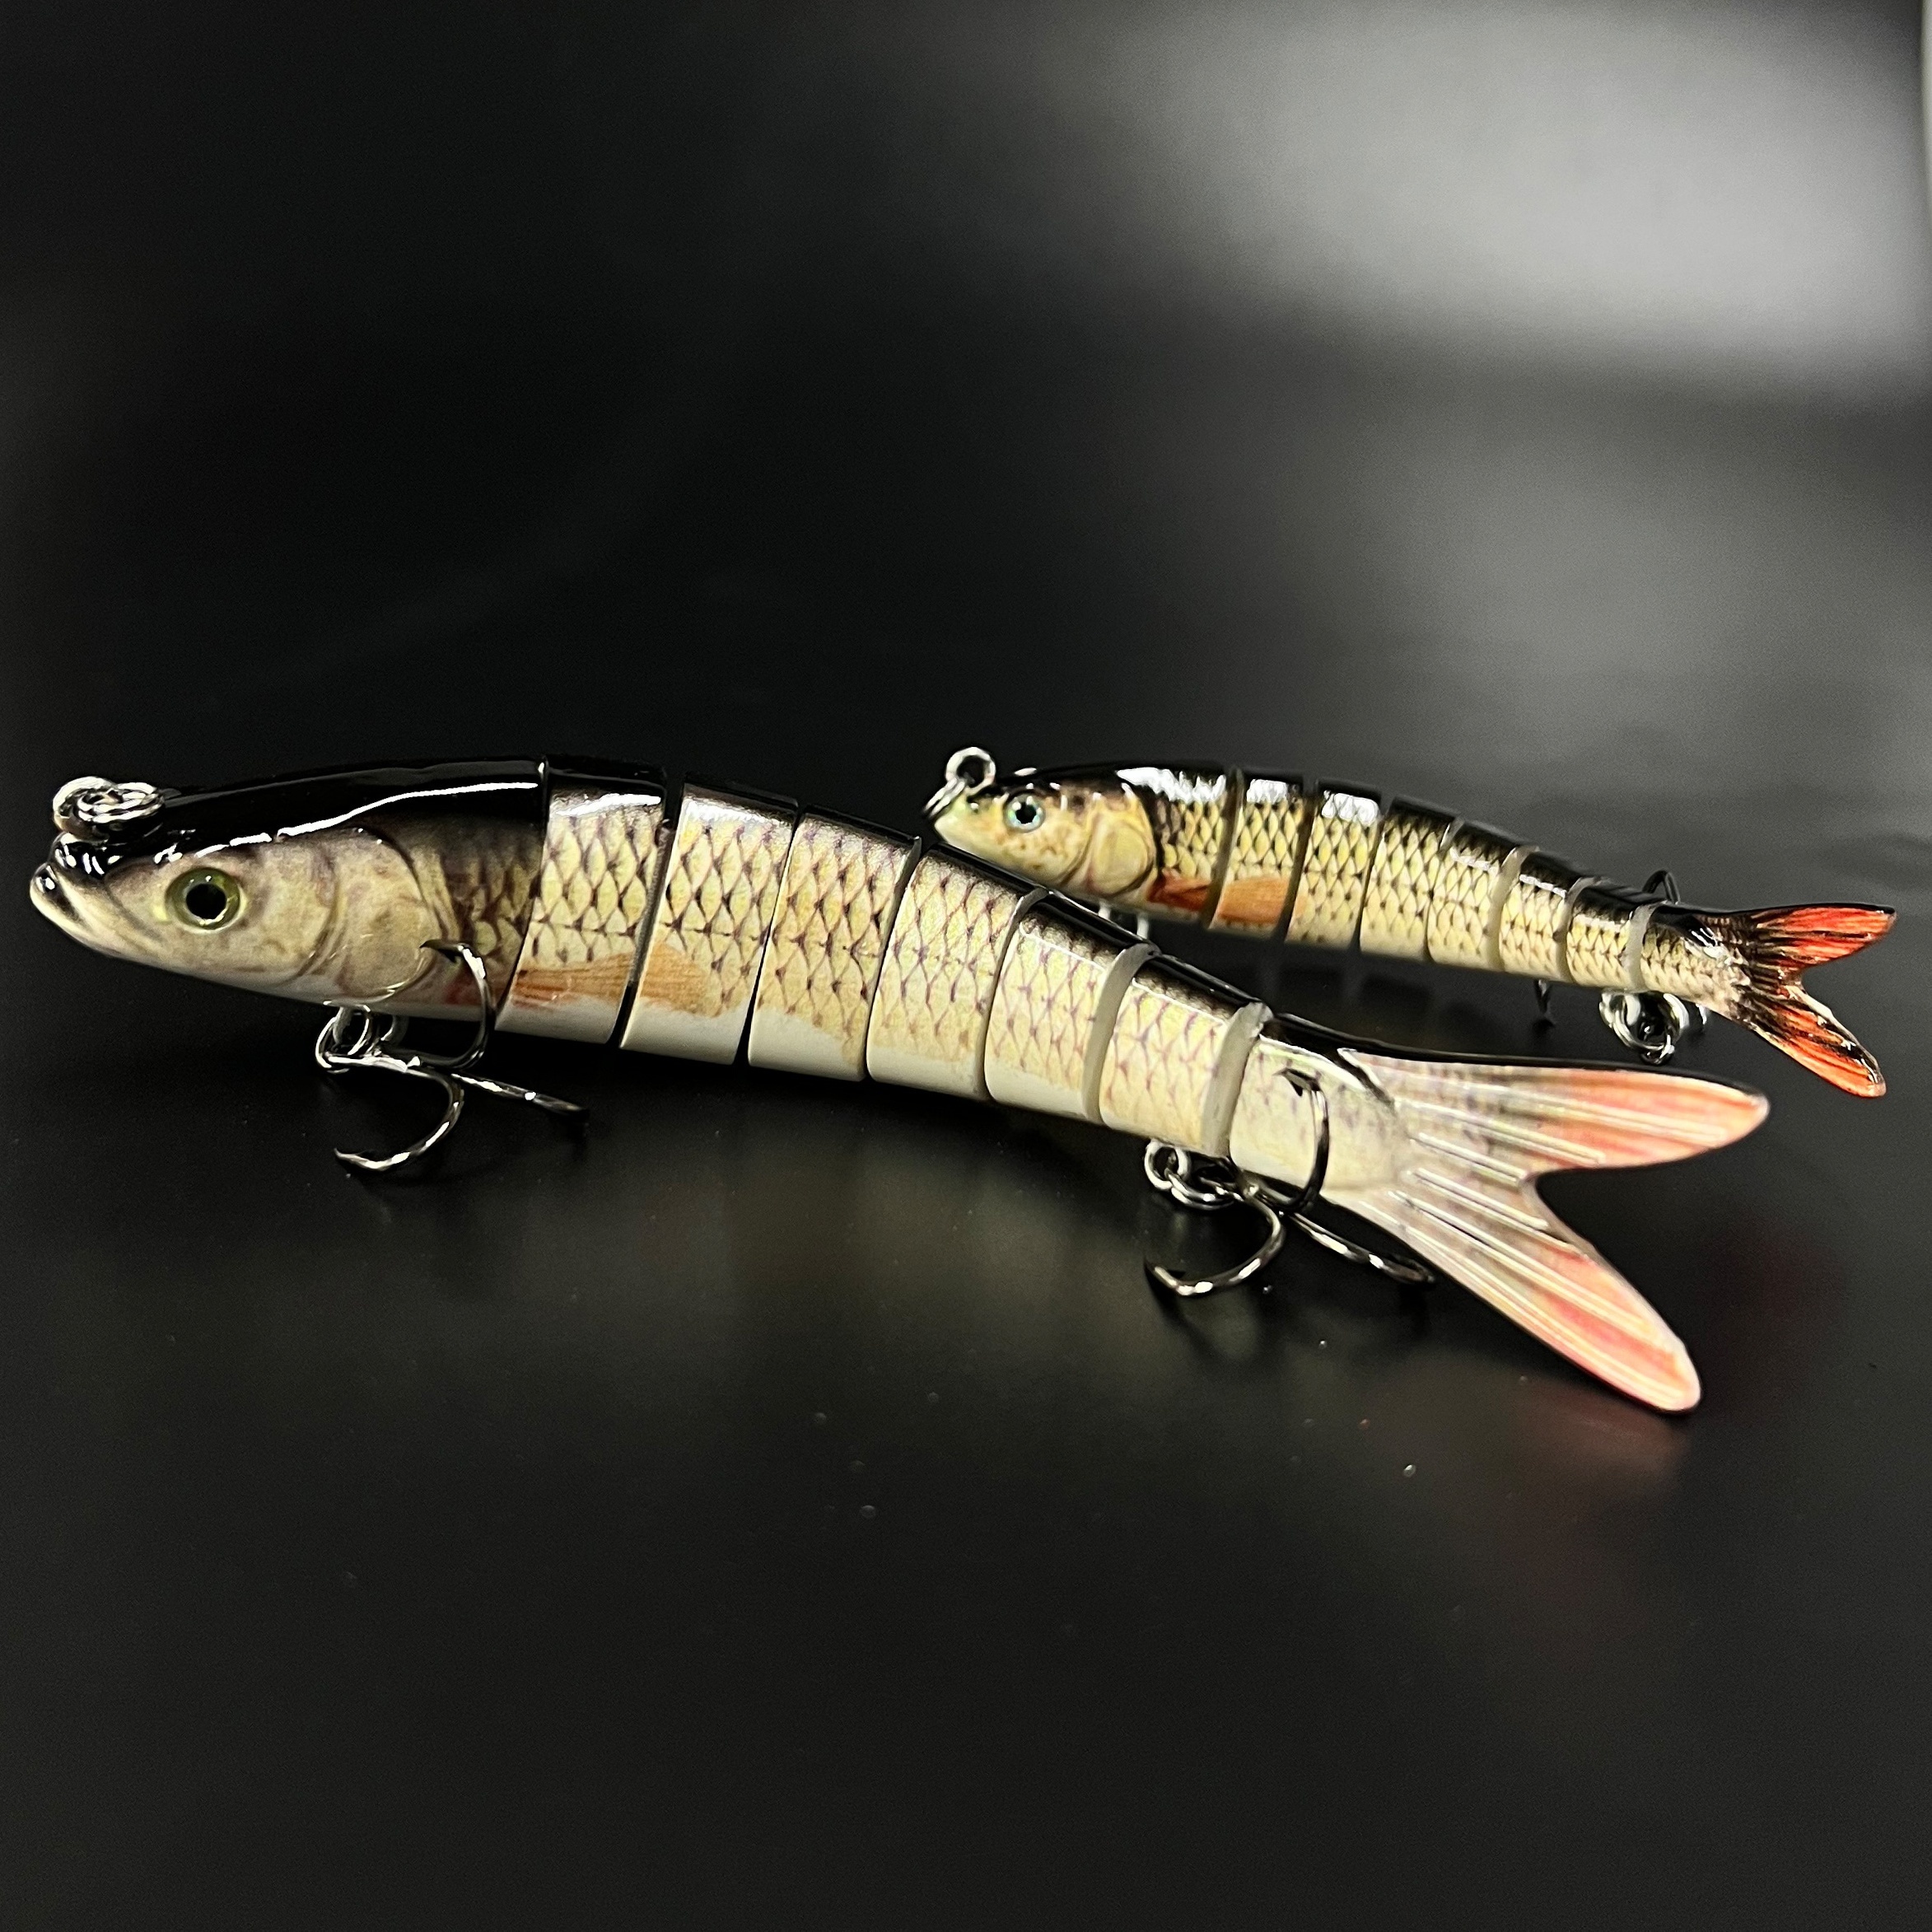 11g 26g Two Size Lifelike Fishing Lures For Bass, Trout, Walleye, Predator  Fish - Realistic Multi Jointed Fish Popper Swimbaits - Spinnerbaits Lure Fi